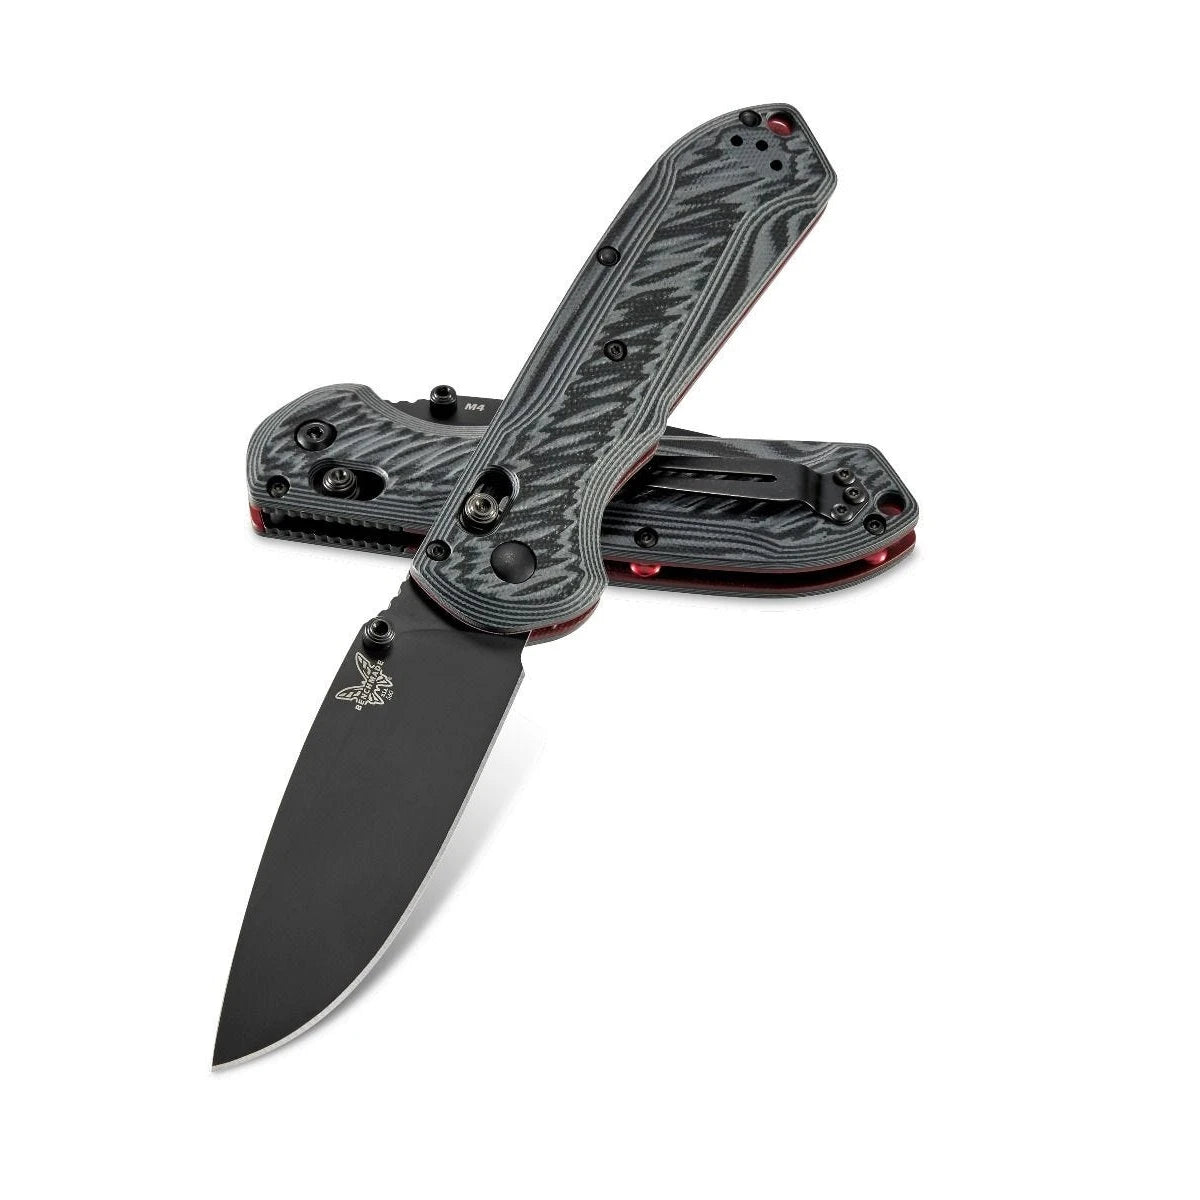 Benchmade | Freek G10 & M4 Every Day Carry Knife